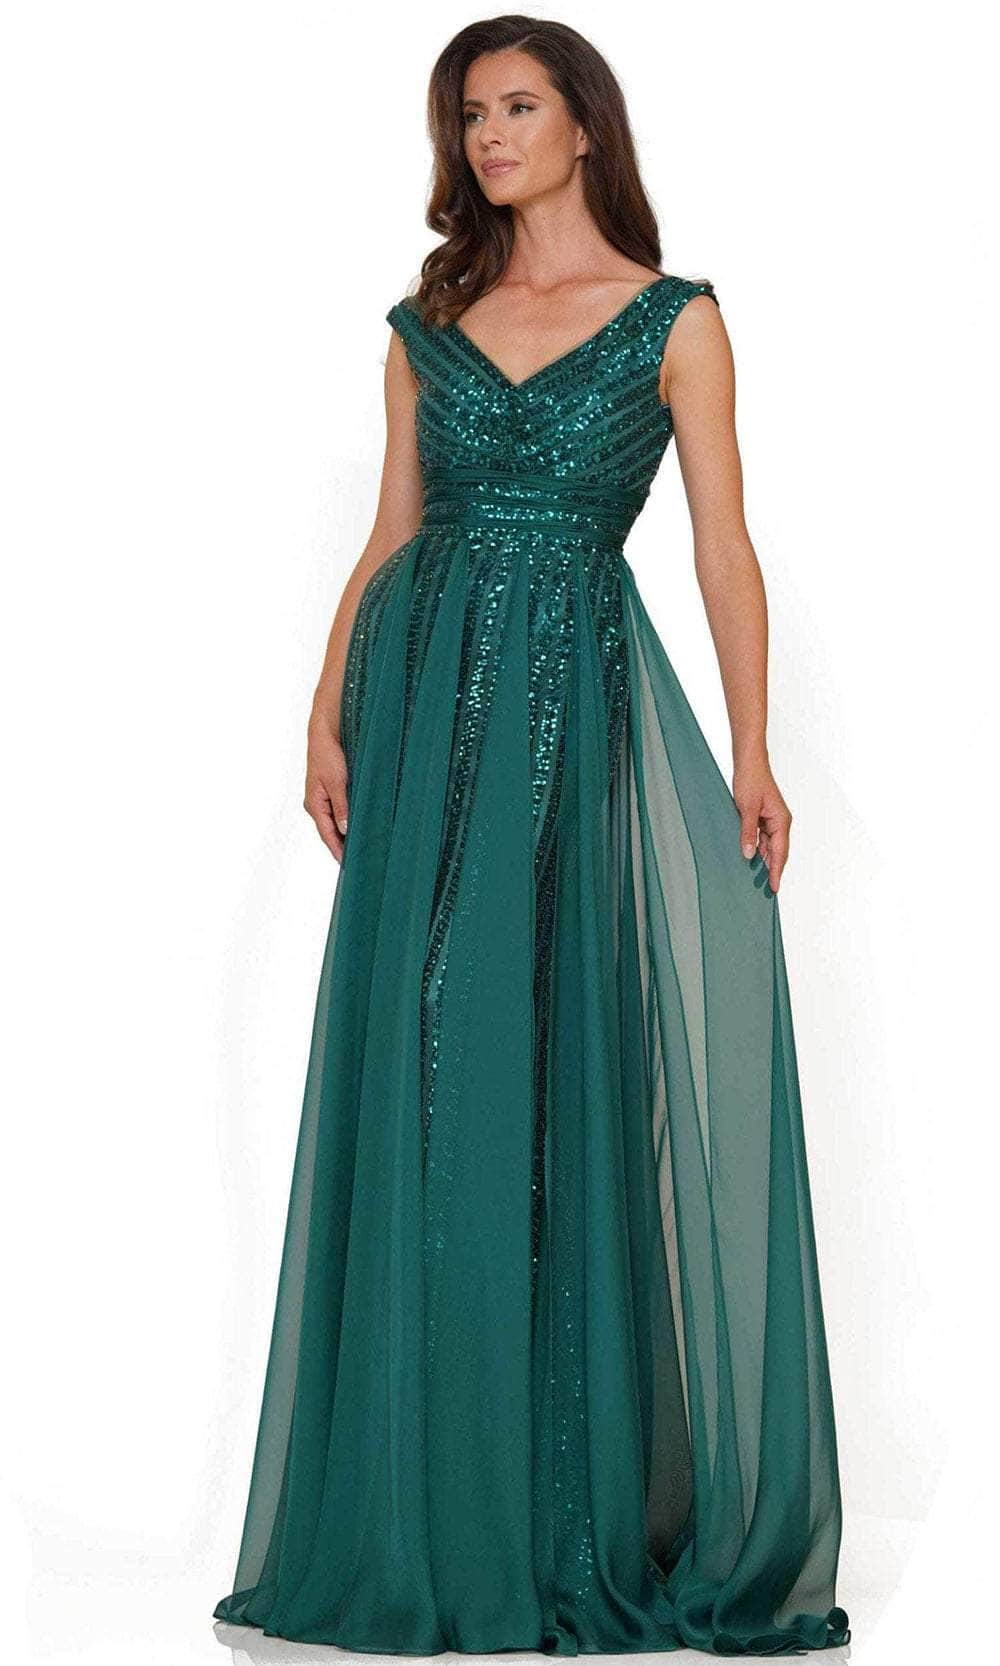 Marsoni by Colors M314 - Embellished A-Line Evening Dress Special Occasion Dress 4 / Deep Green